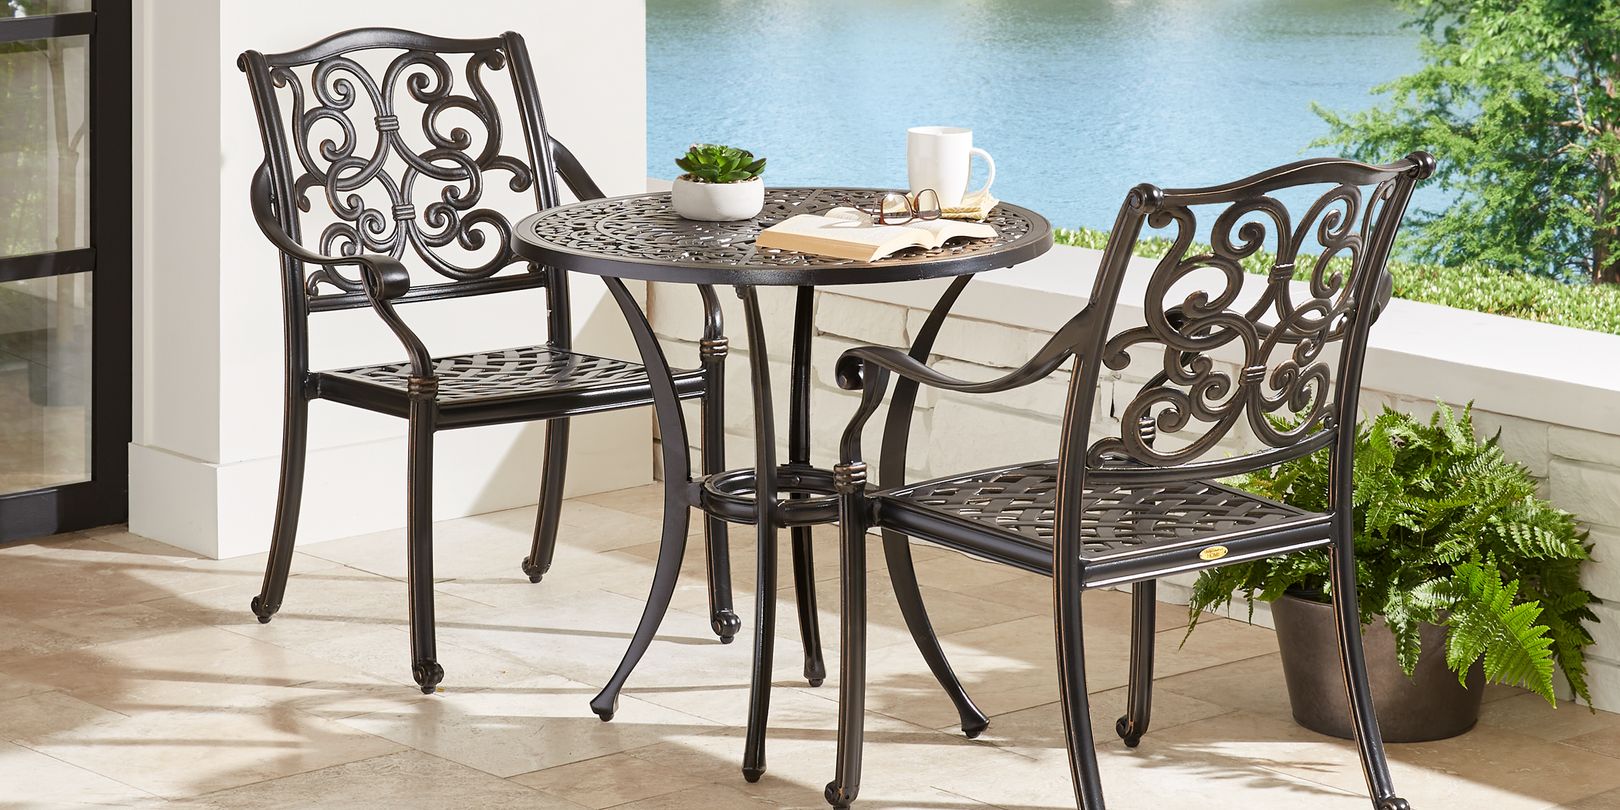 Photo of a 3-piece wrought iron bistro set on a patio